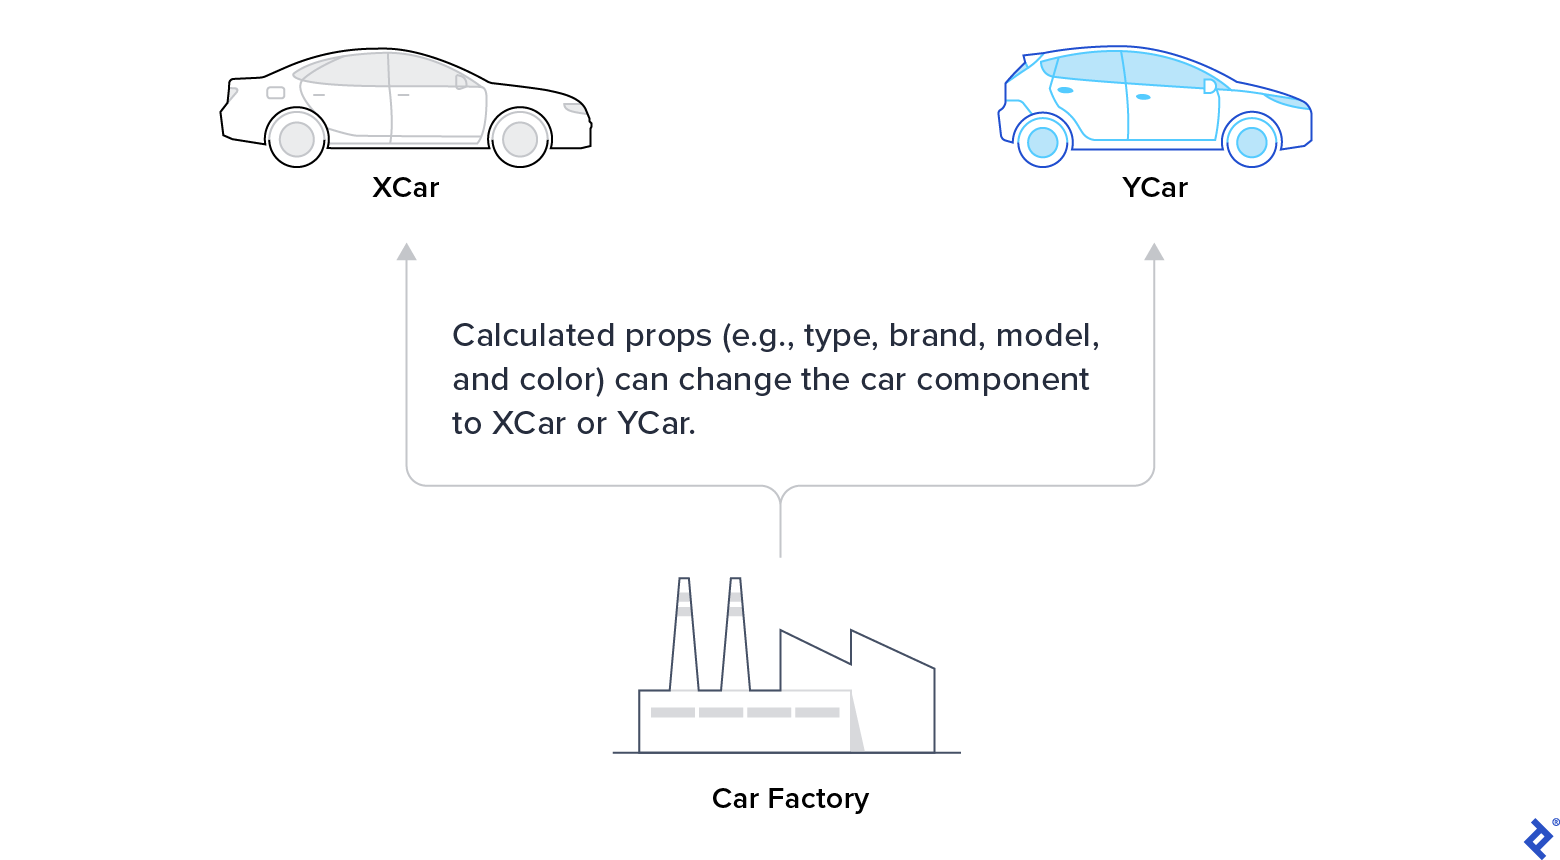 A factory produces an XCar or a YCar based on calculated props such as type, brand, model, and color.